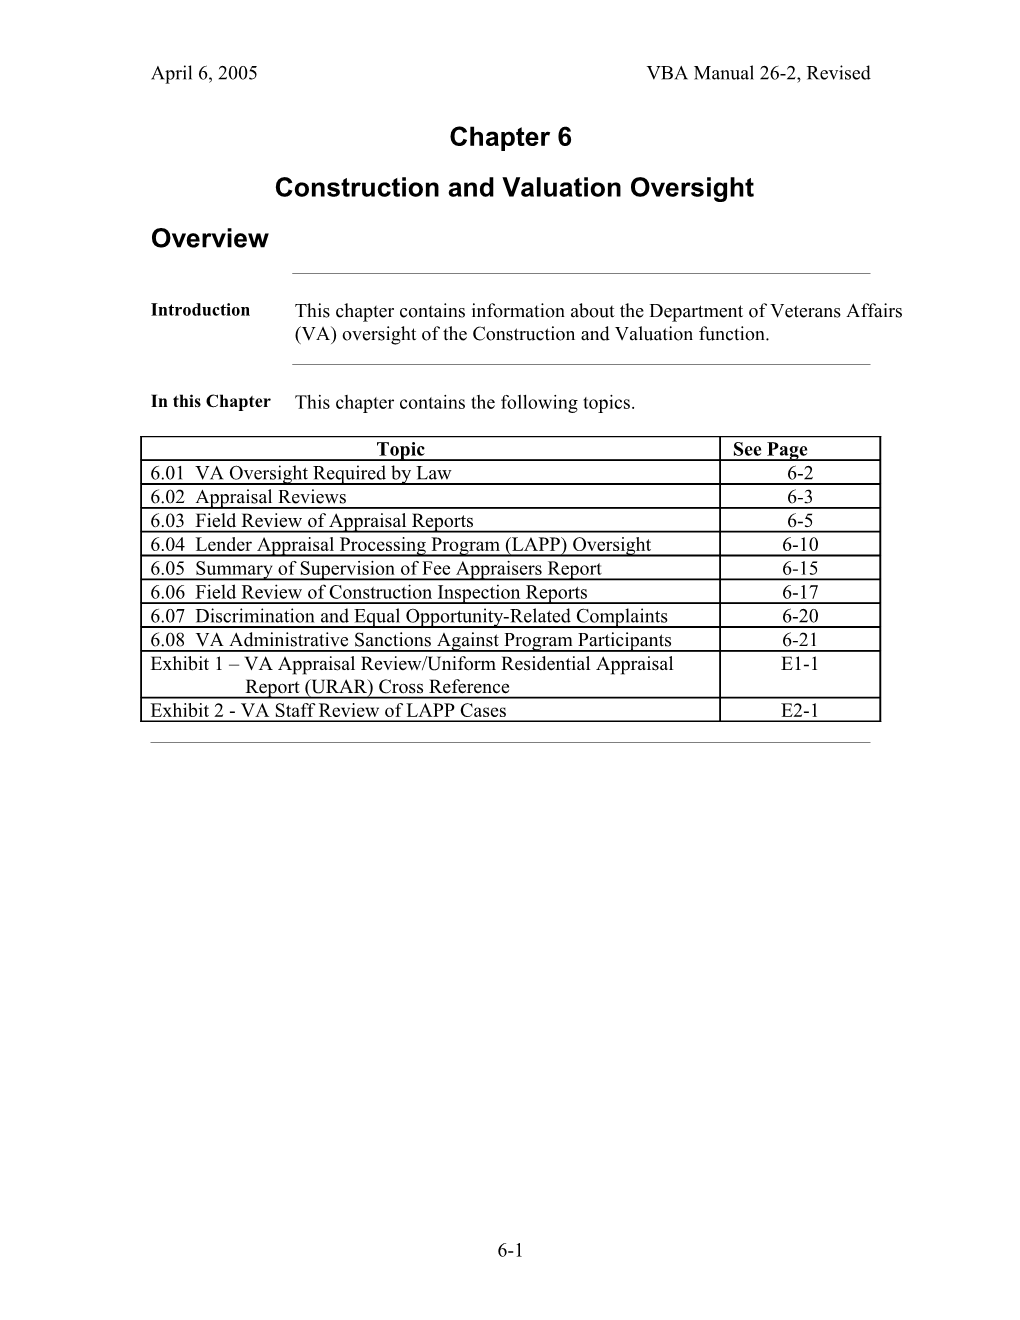 Construction and Valuation Oversight